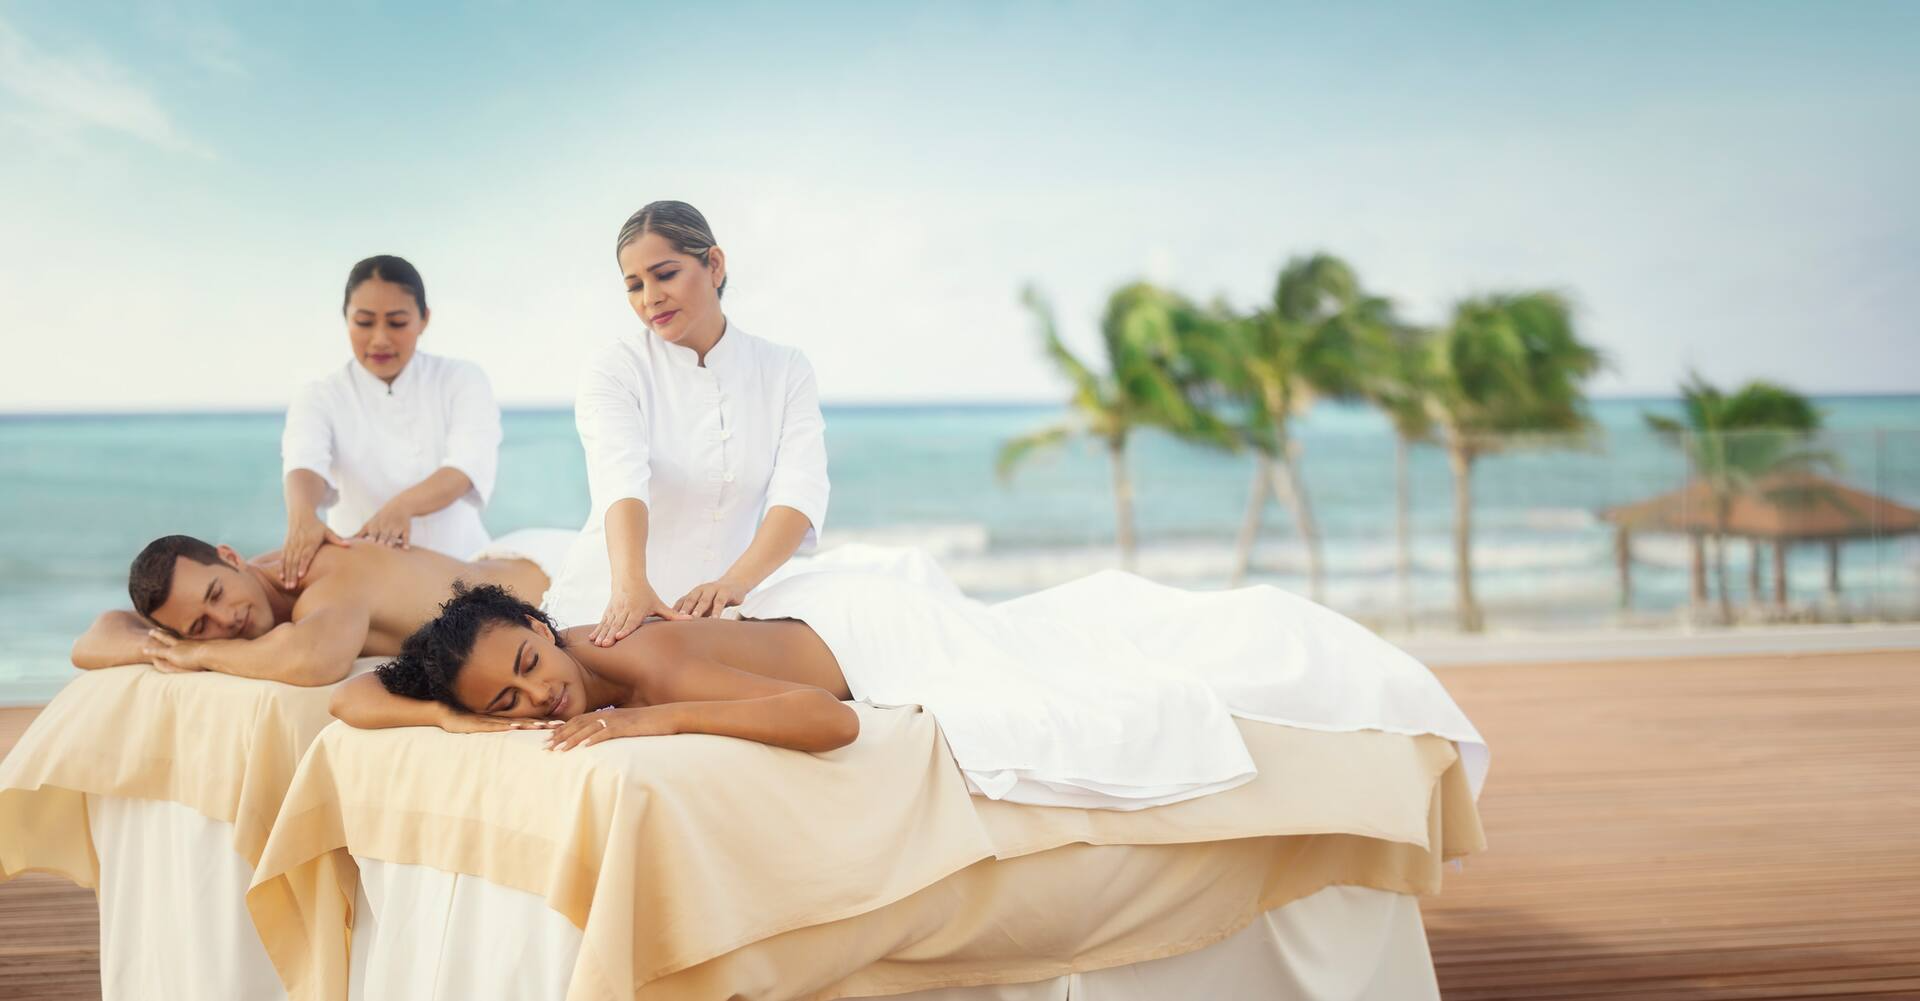 Restore balance with a well-deserved massage.